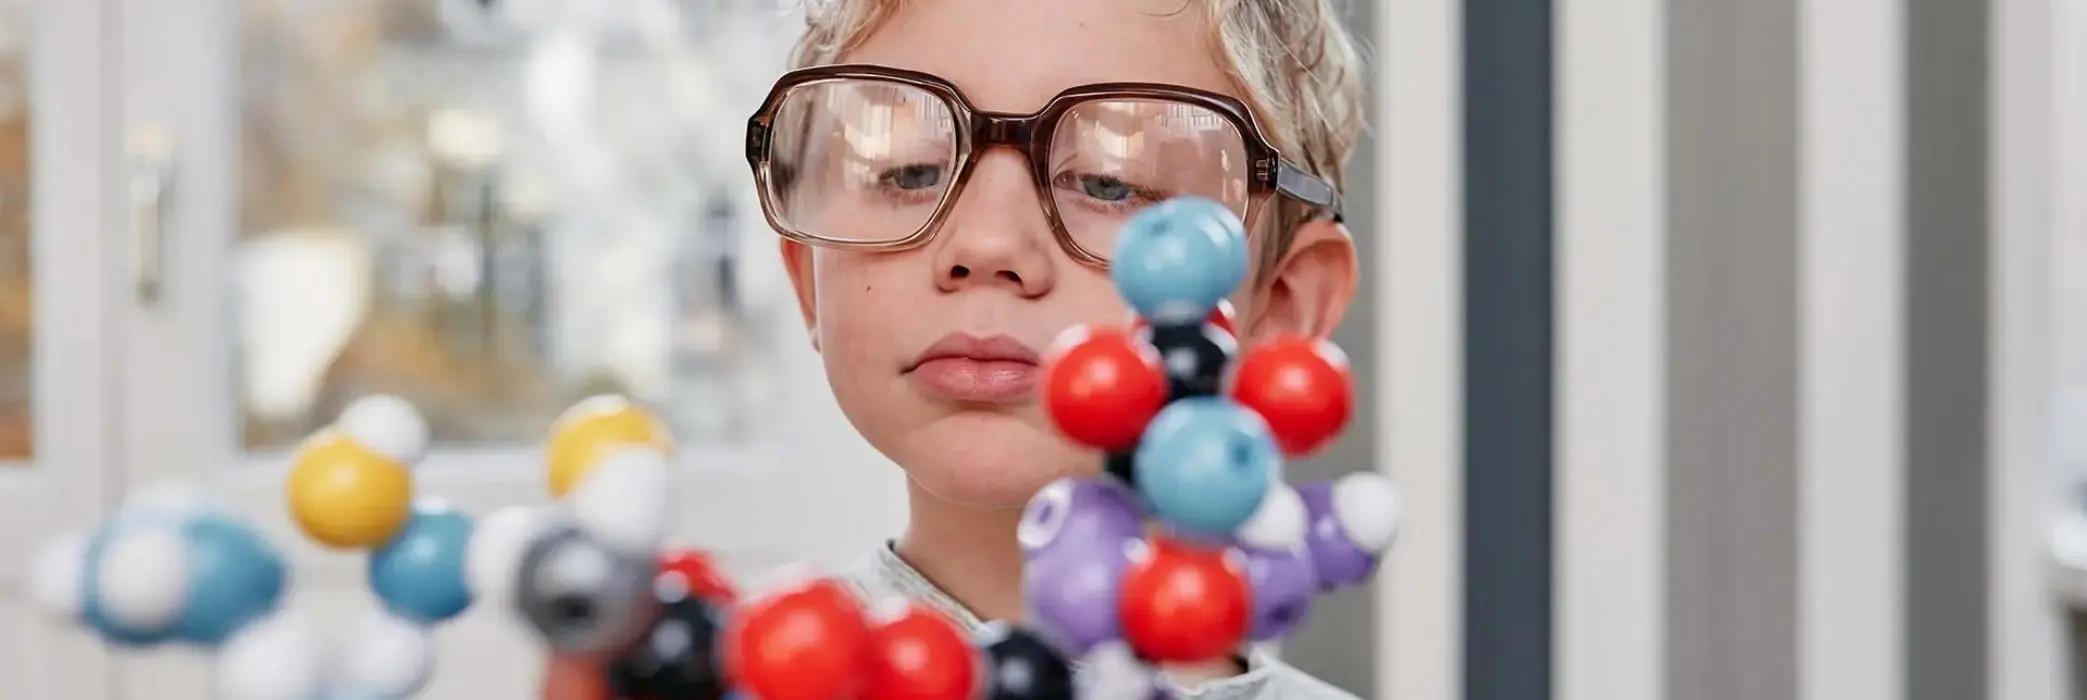 A child scientist looks at the molecular model